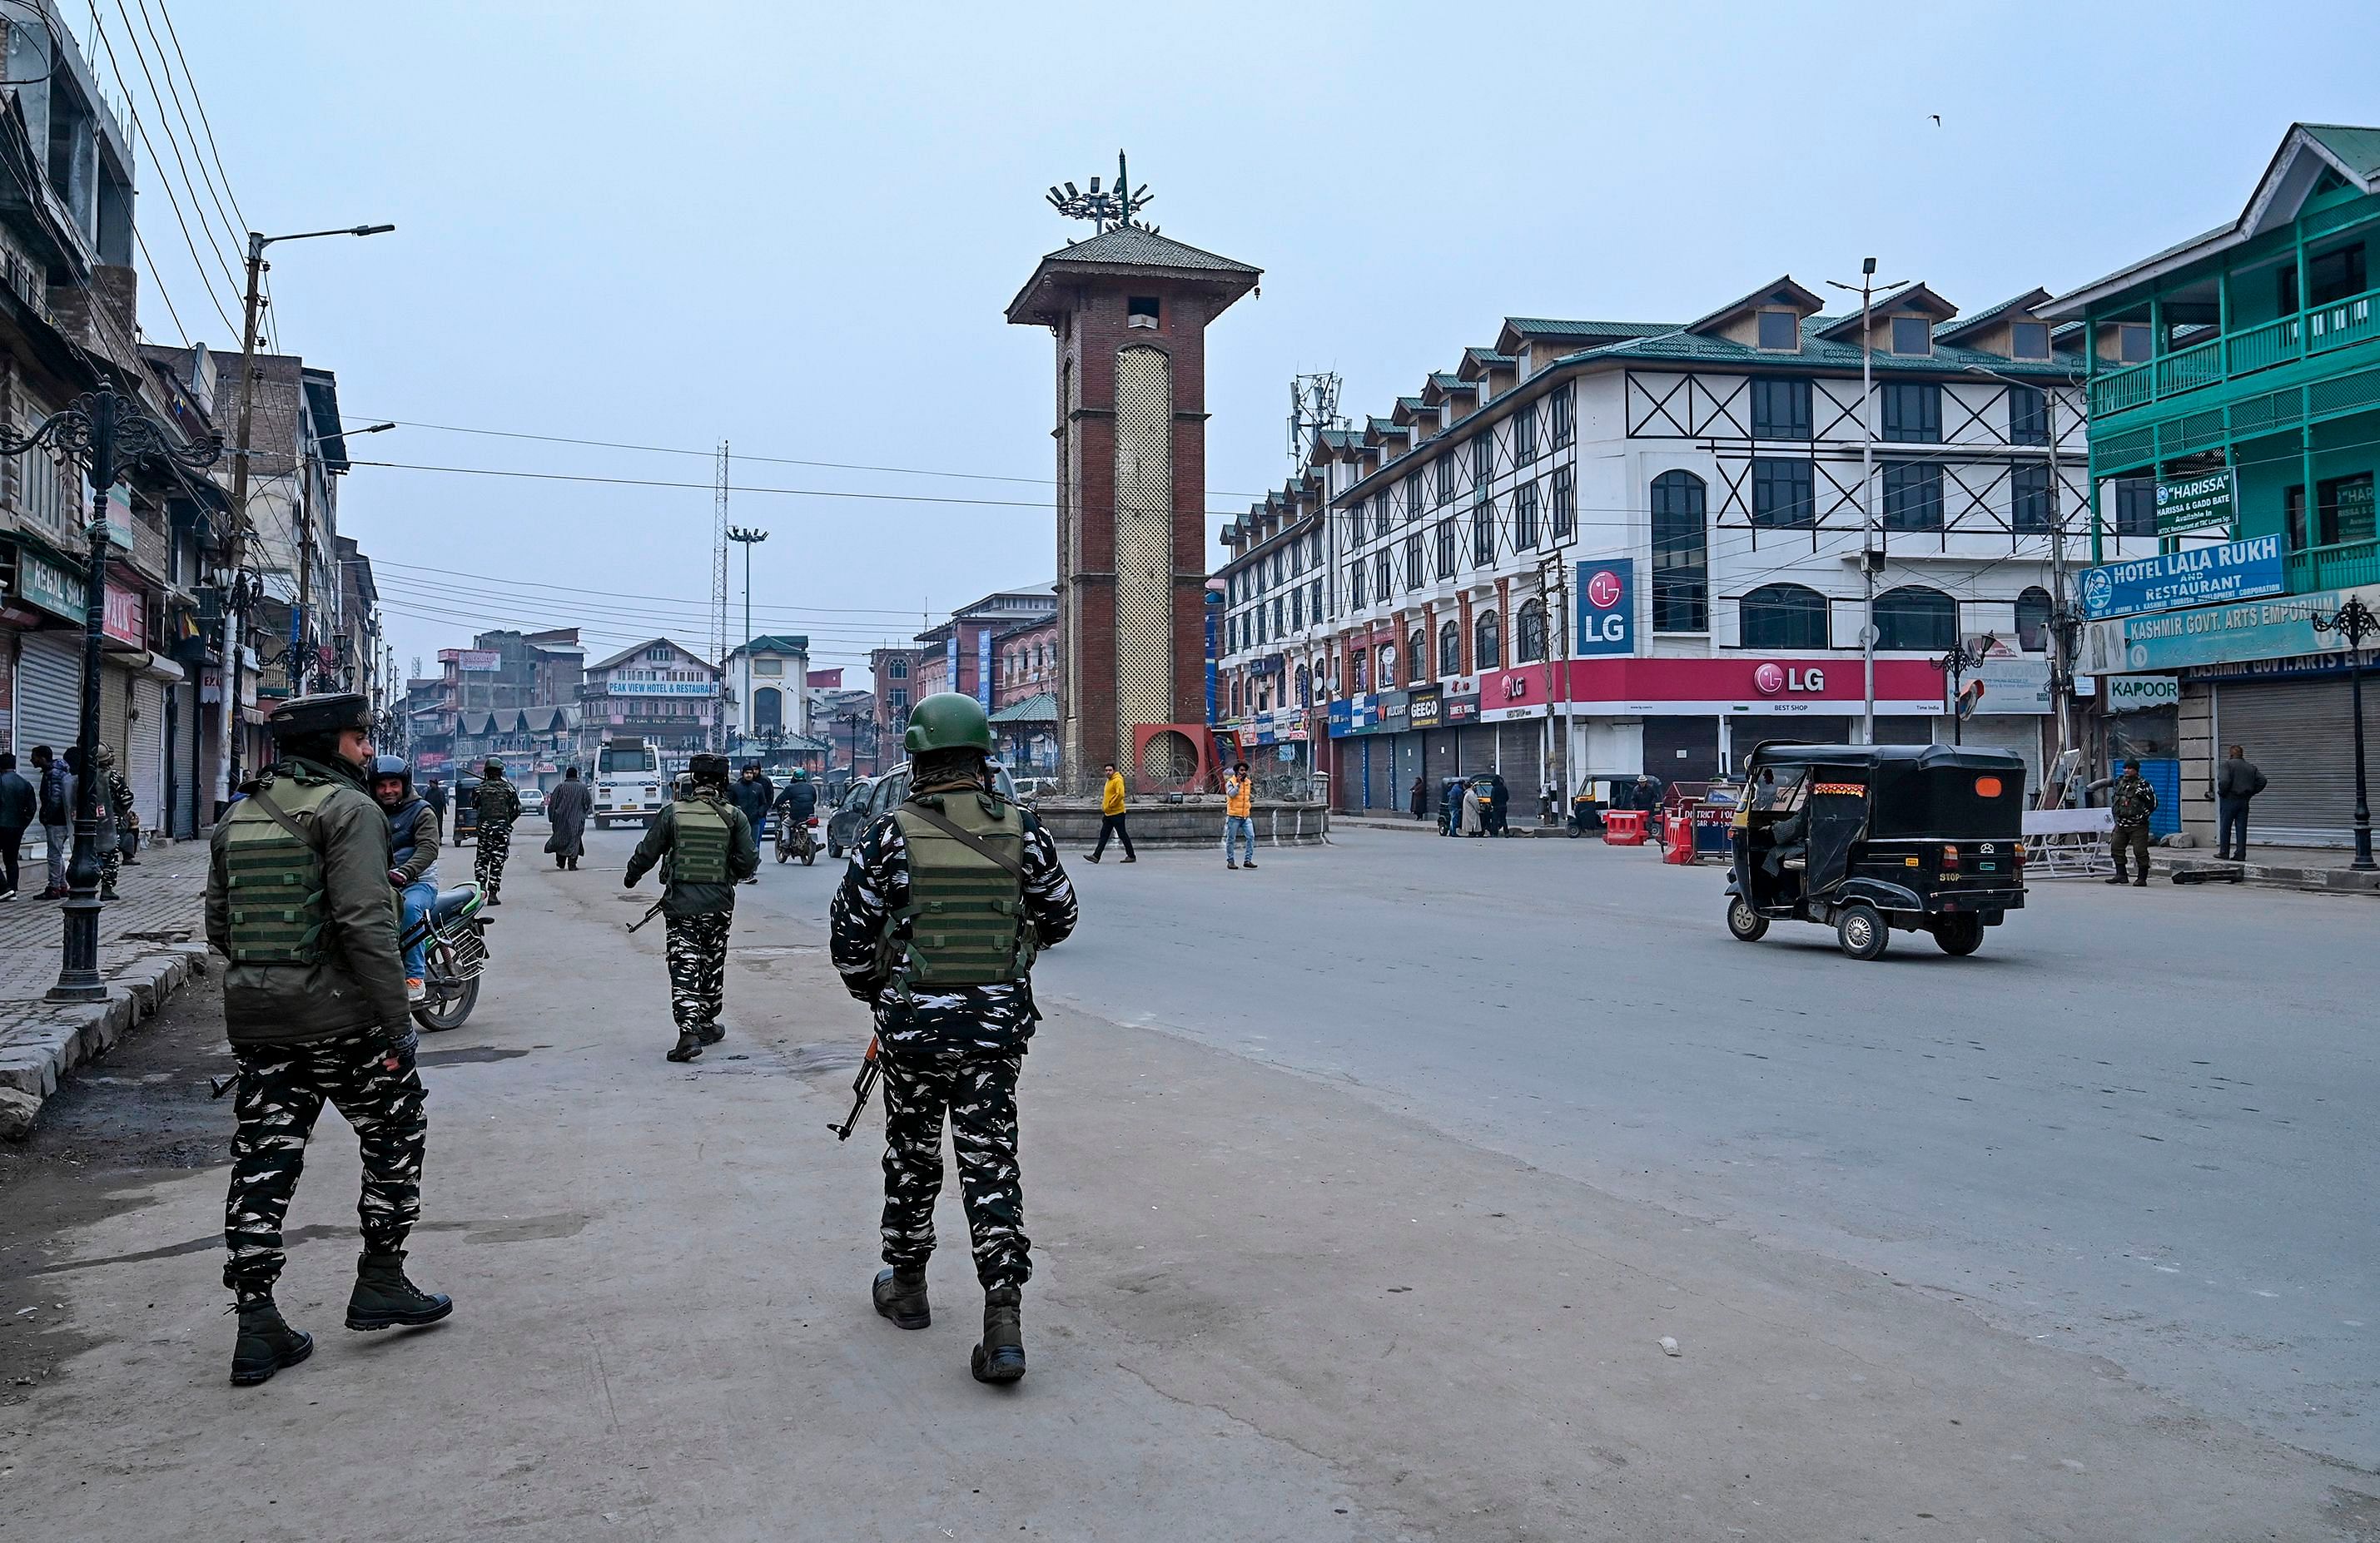 "Hundreds of Kashmiris remain in 'preventive detention', including key political figures," they said. (Credit: AFP Photo)